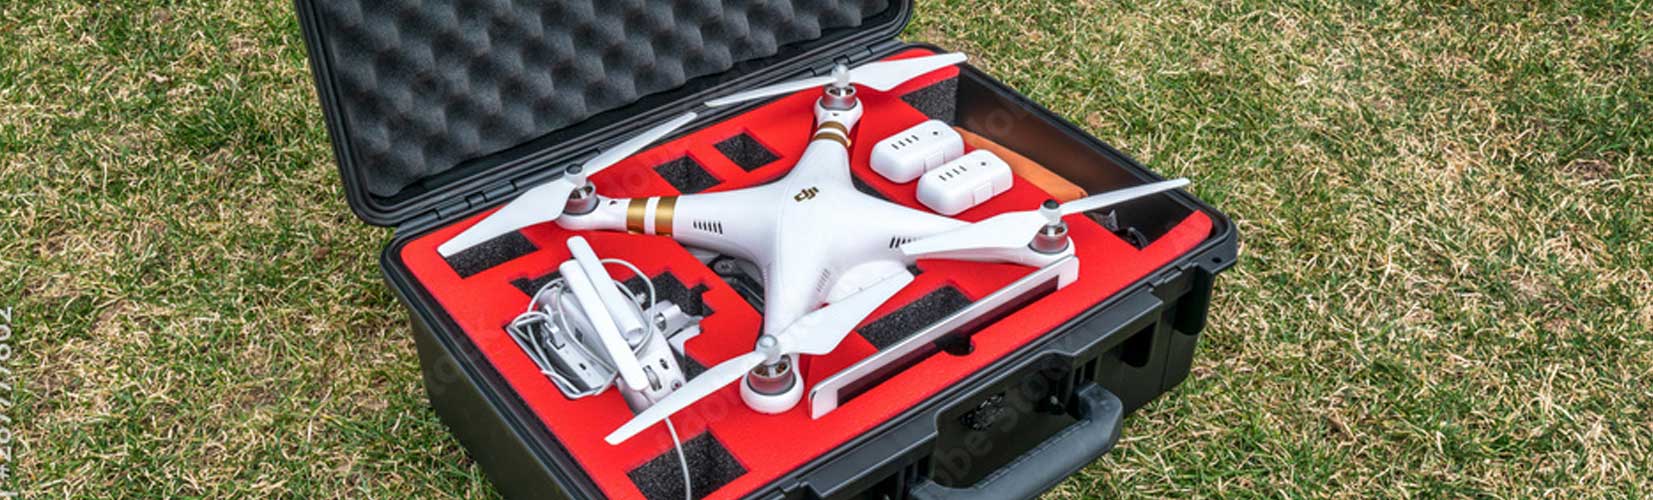 A drone is protected by engineered foam inside a hard case